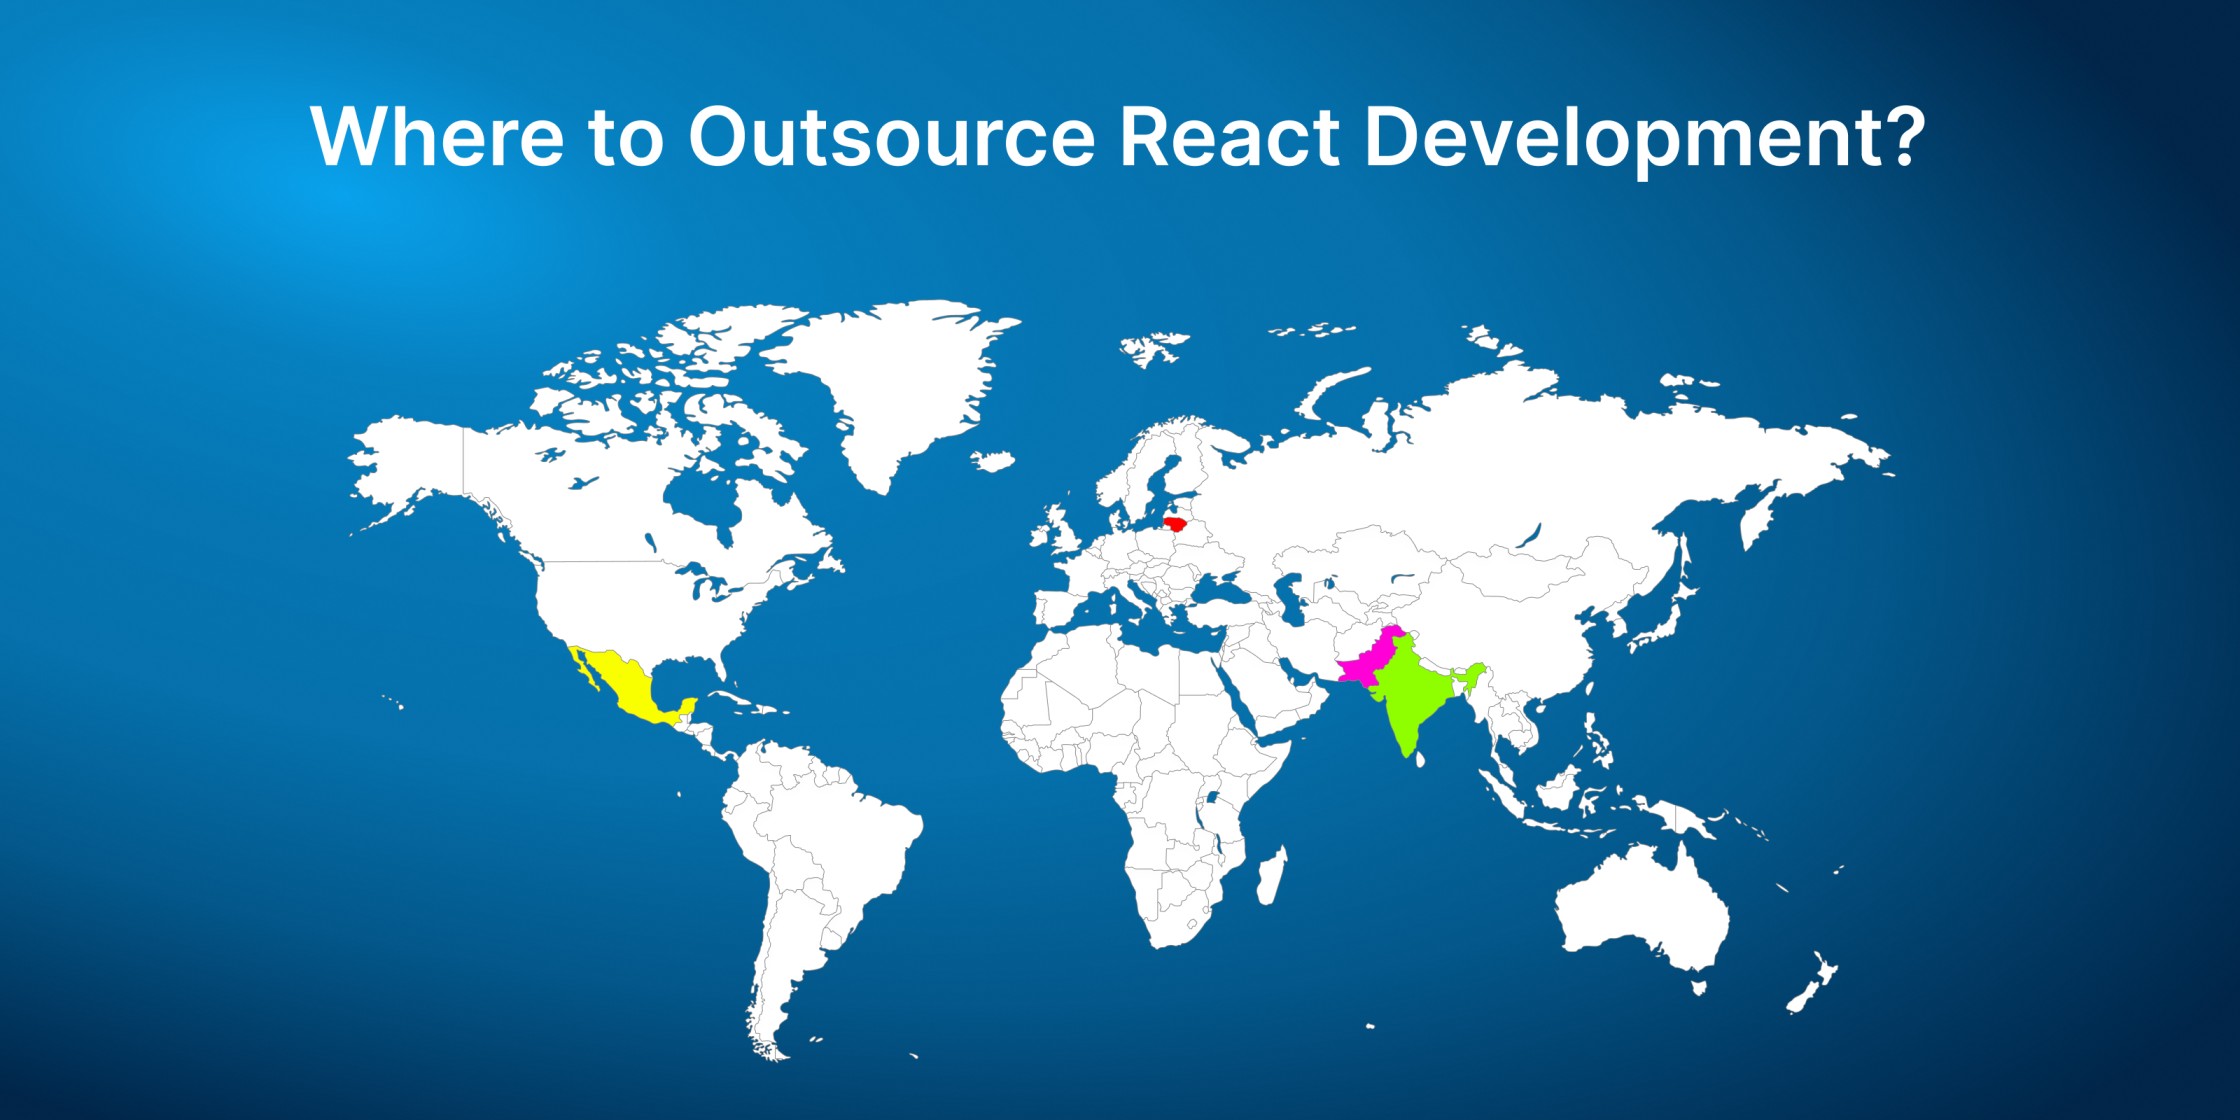 Countries to outsource react development to